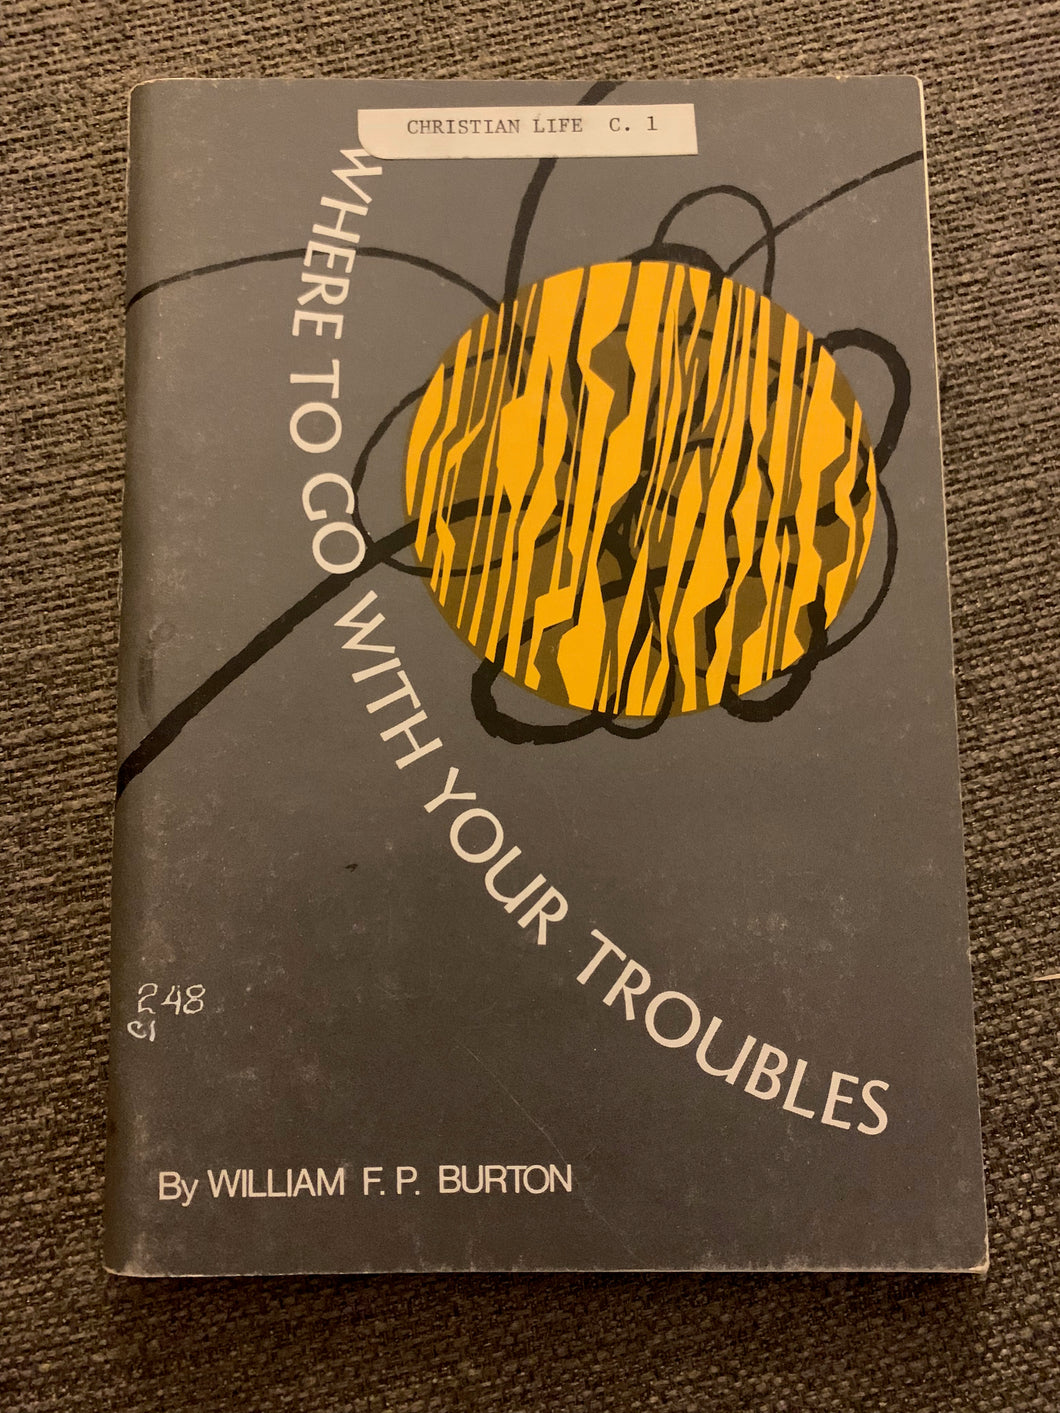 Where to Go With Your Troubles by William F.P. Burton